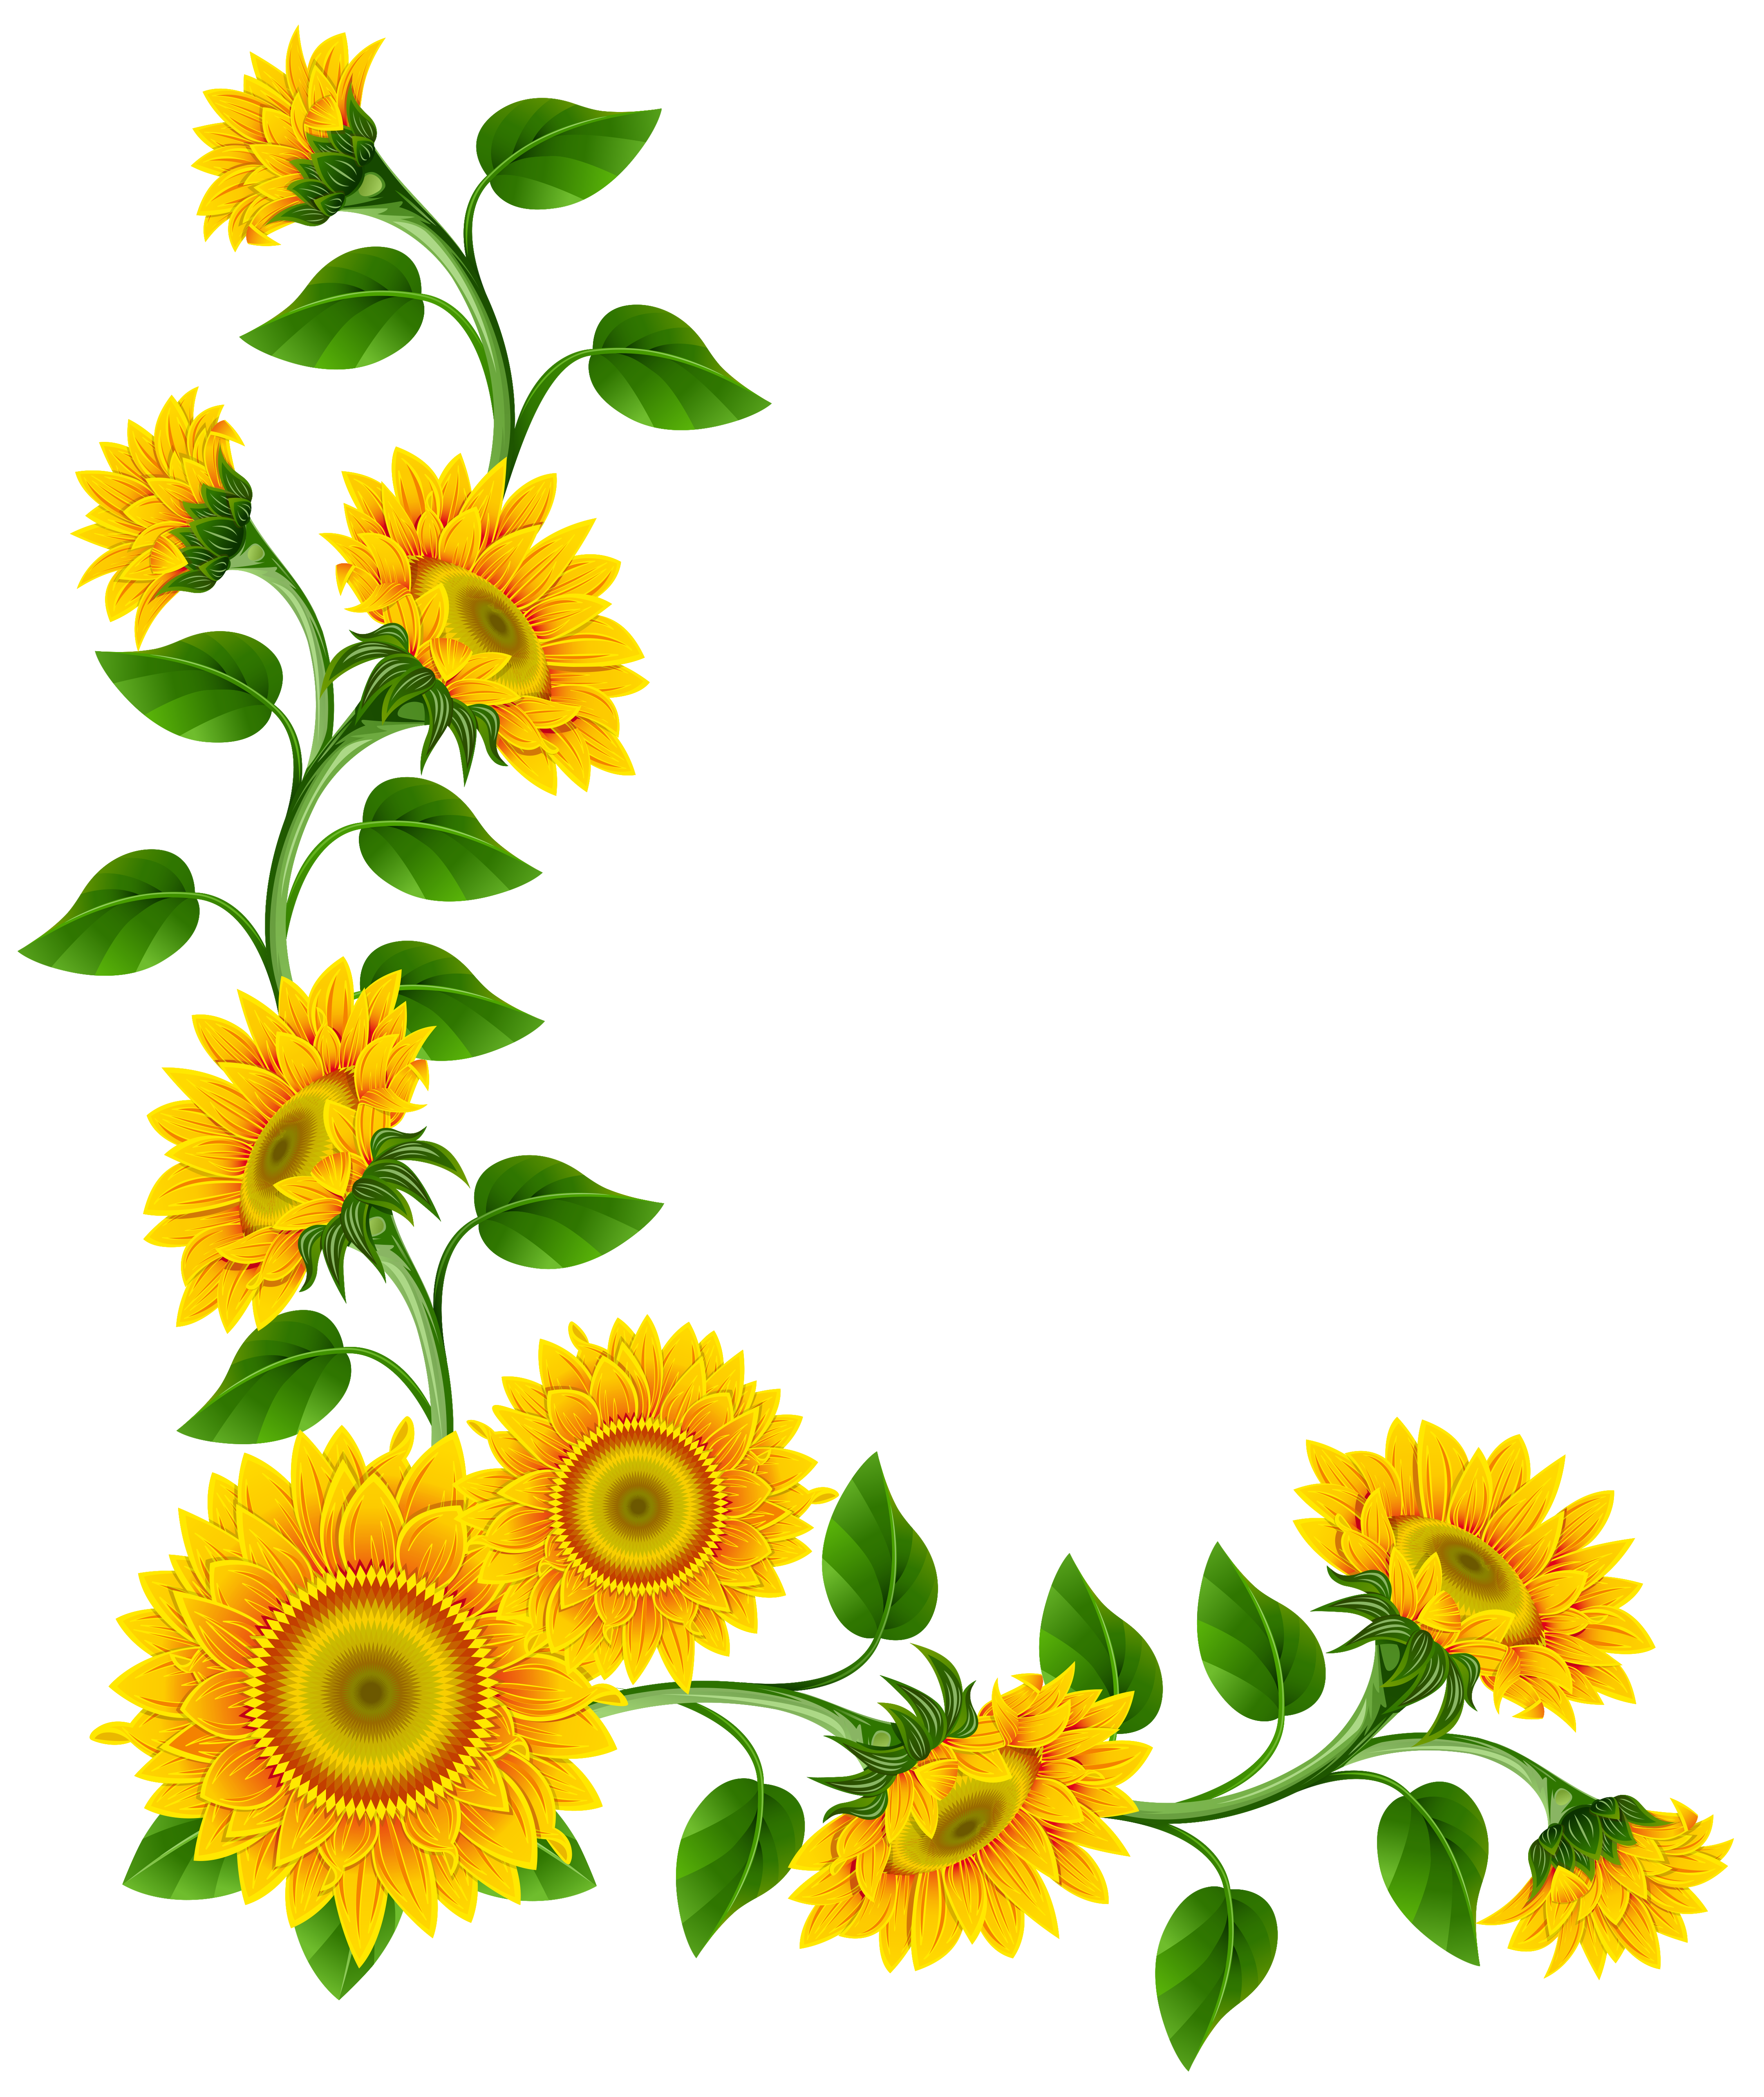 Decoration clipart yellow. Sunflower border png image